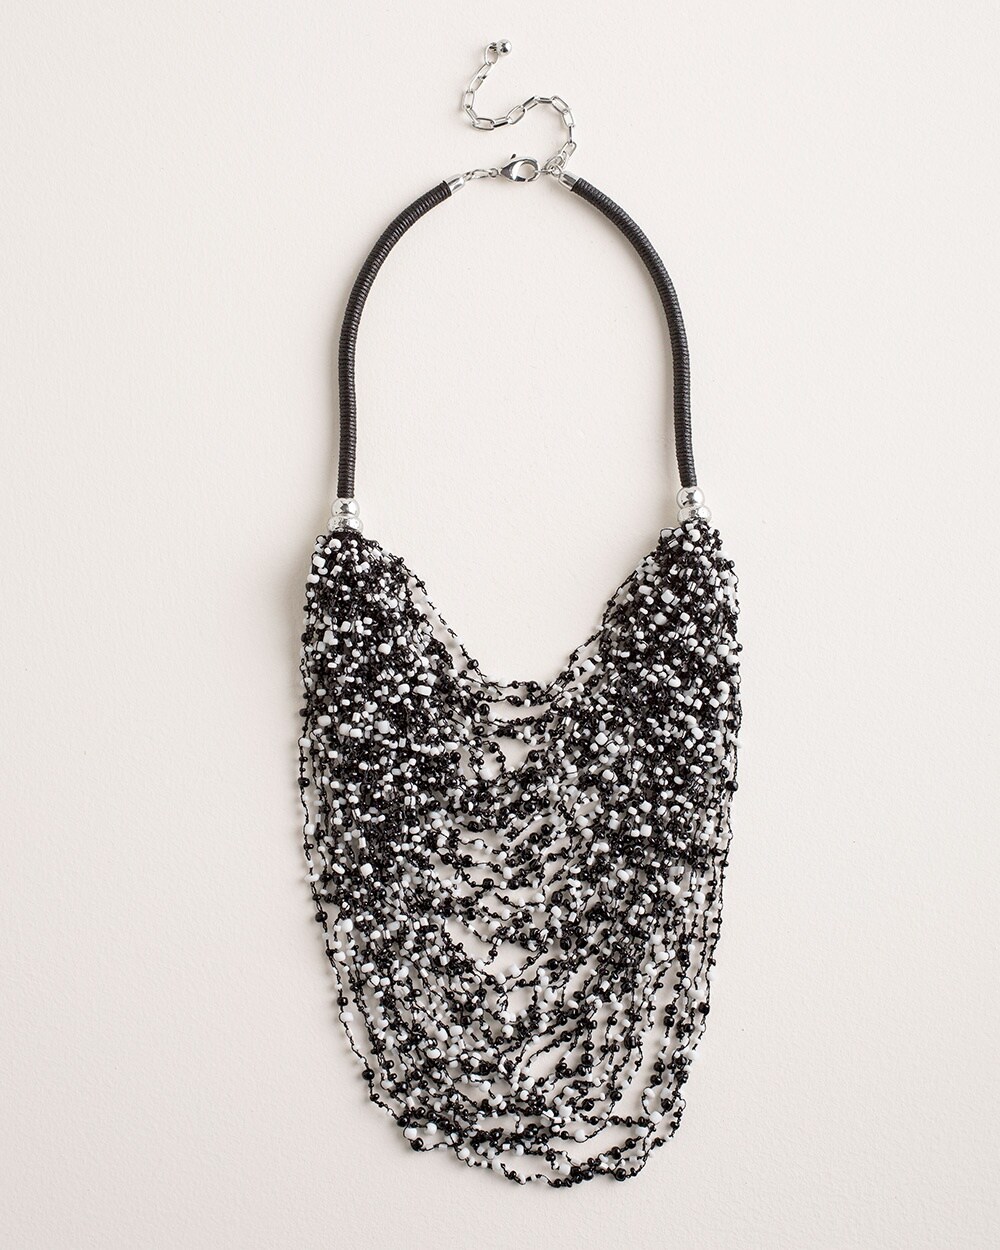 Black and White Beaded Bib Necklace